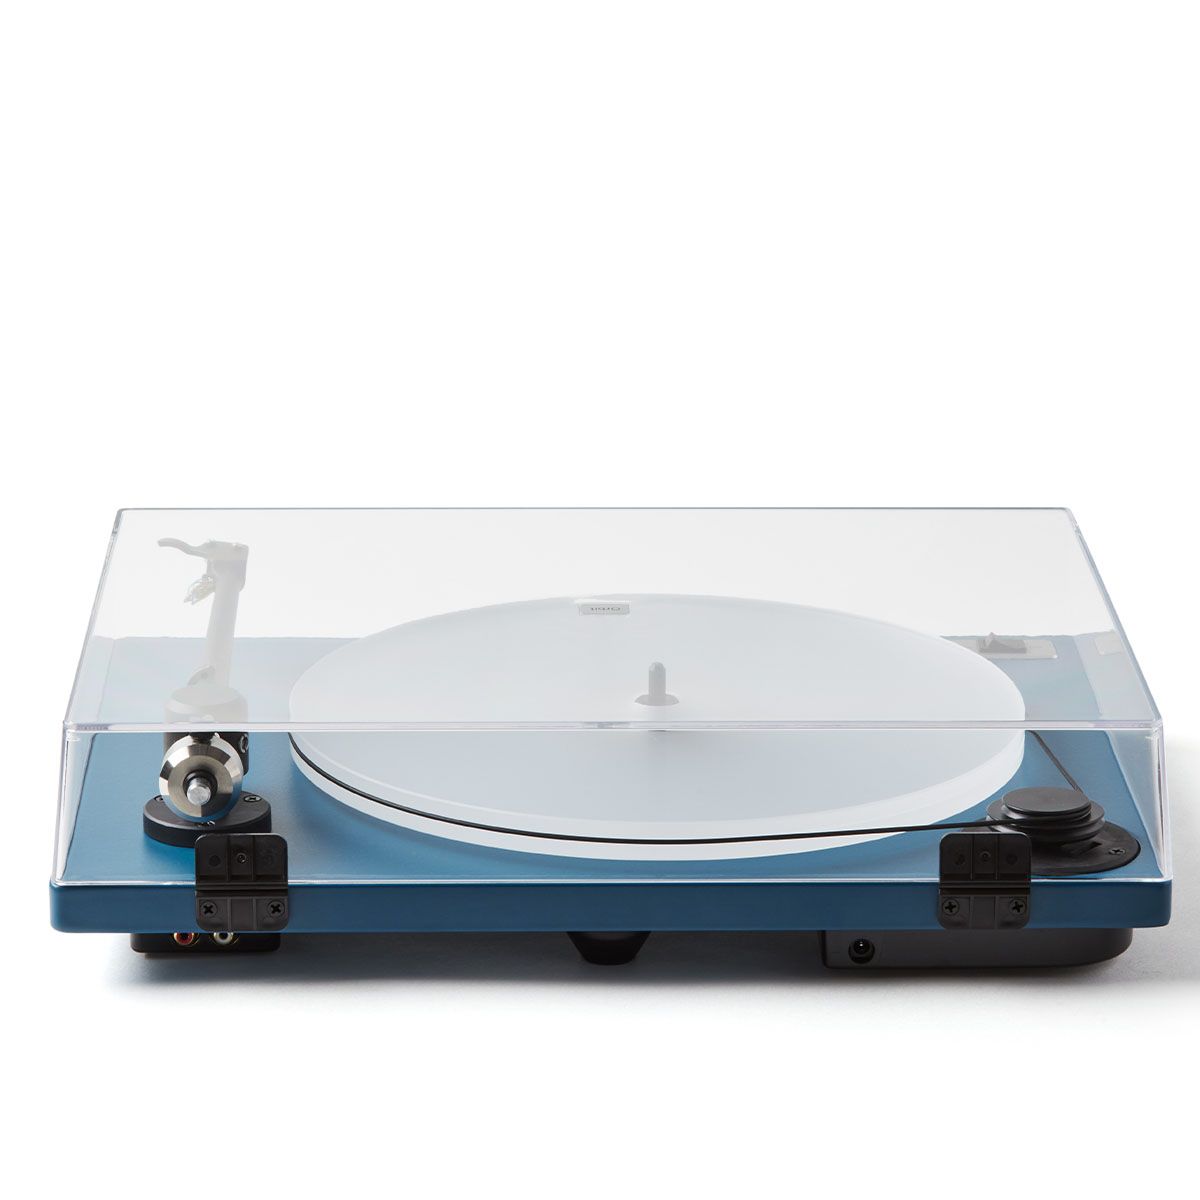 Blue U-Turn Orbit 2 Plus Turntable on white background with dustcover closed - rear inputs